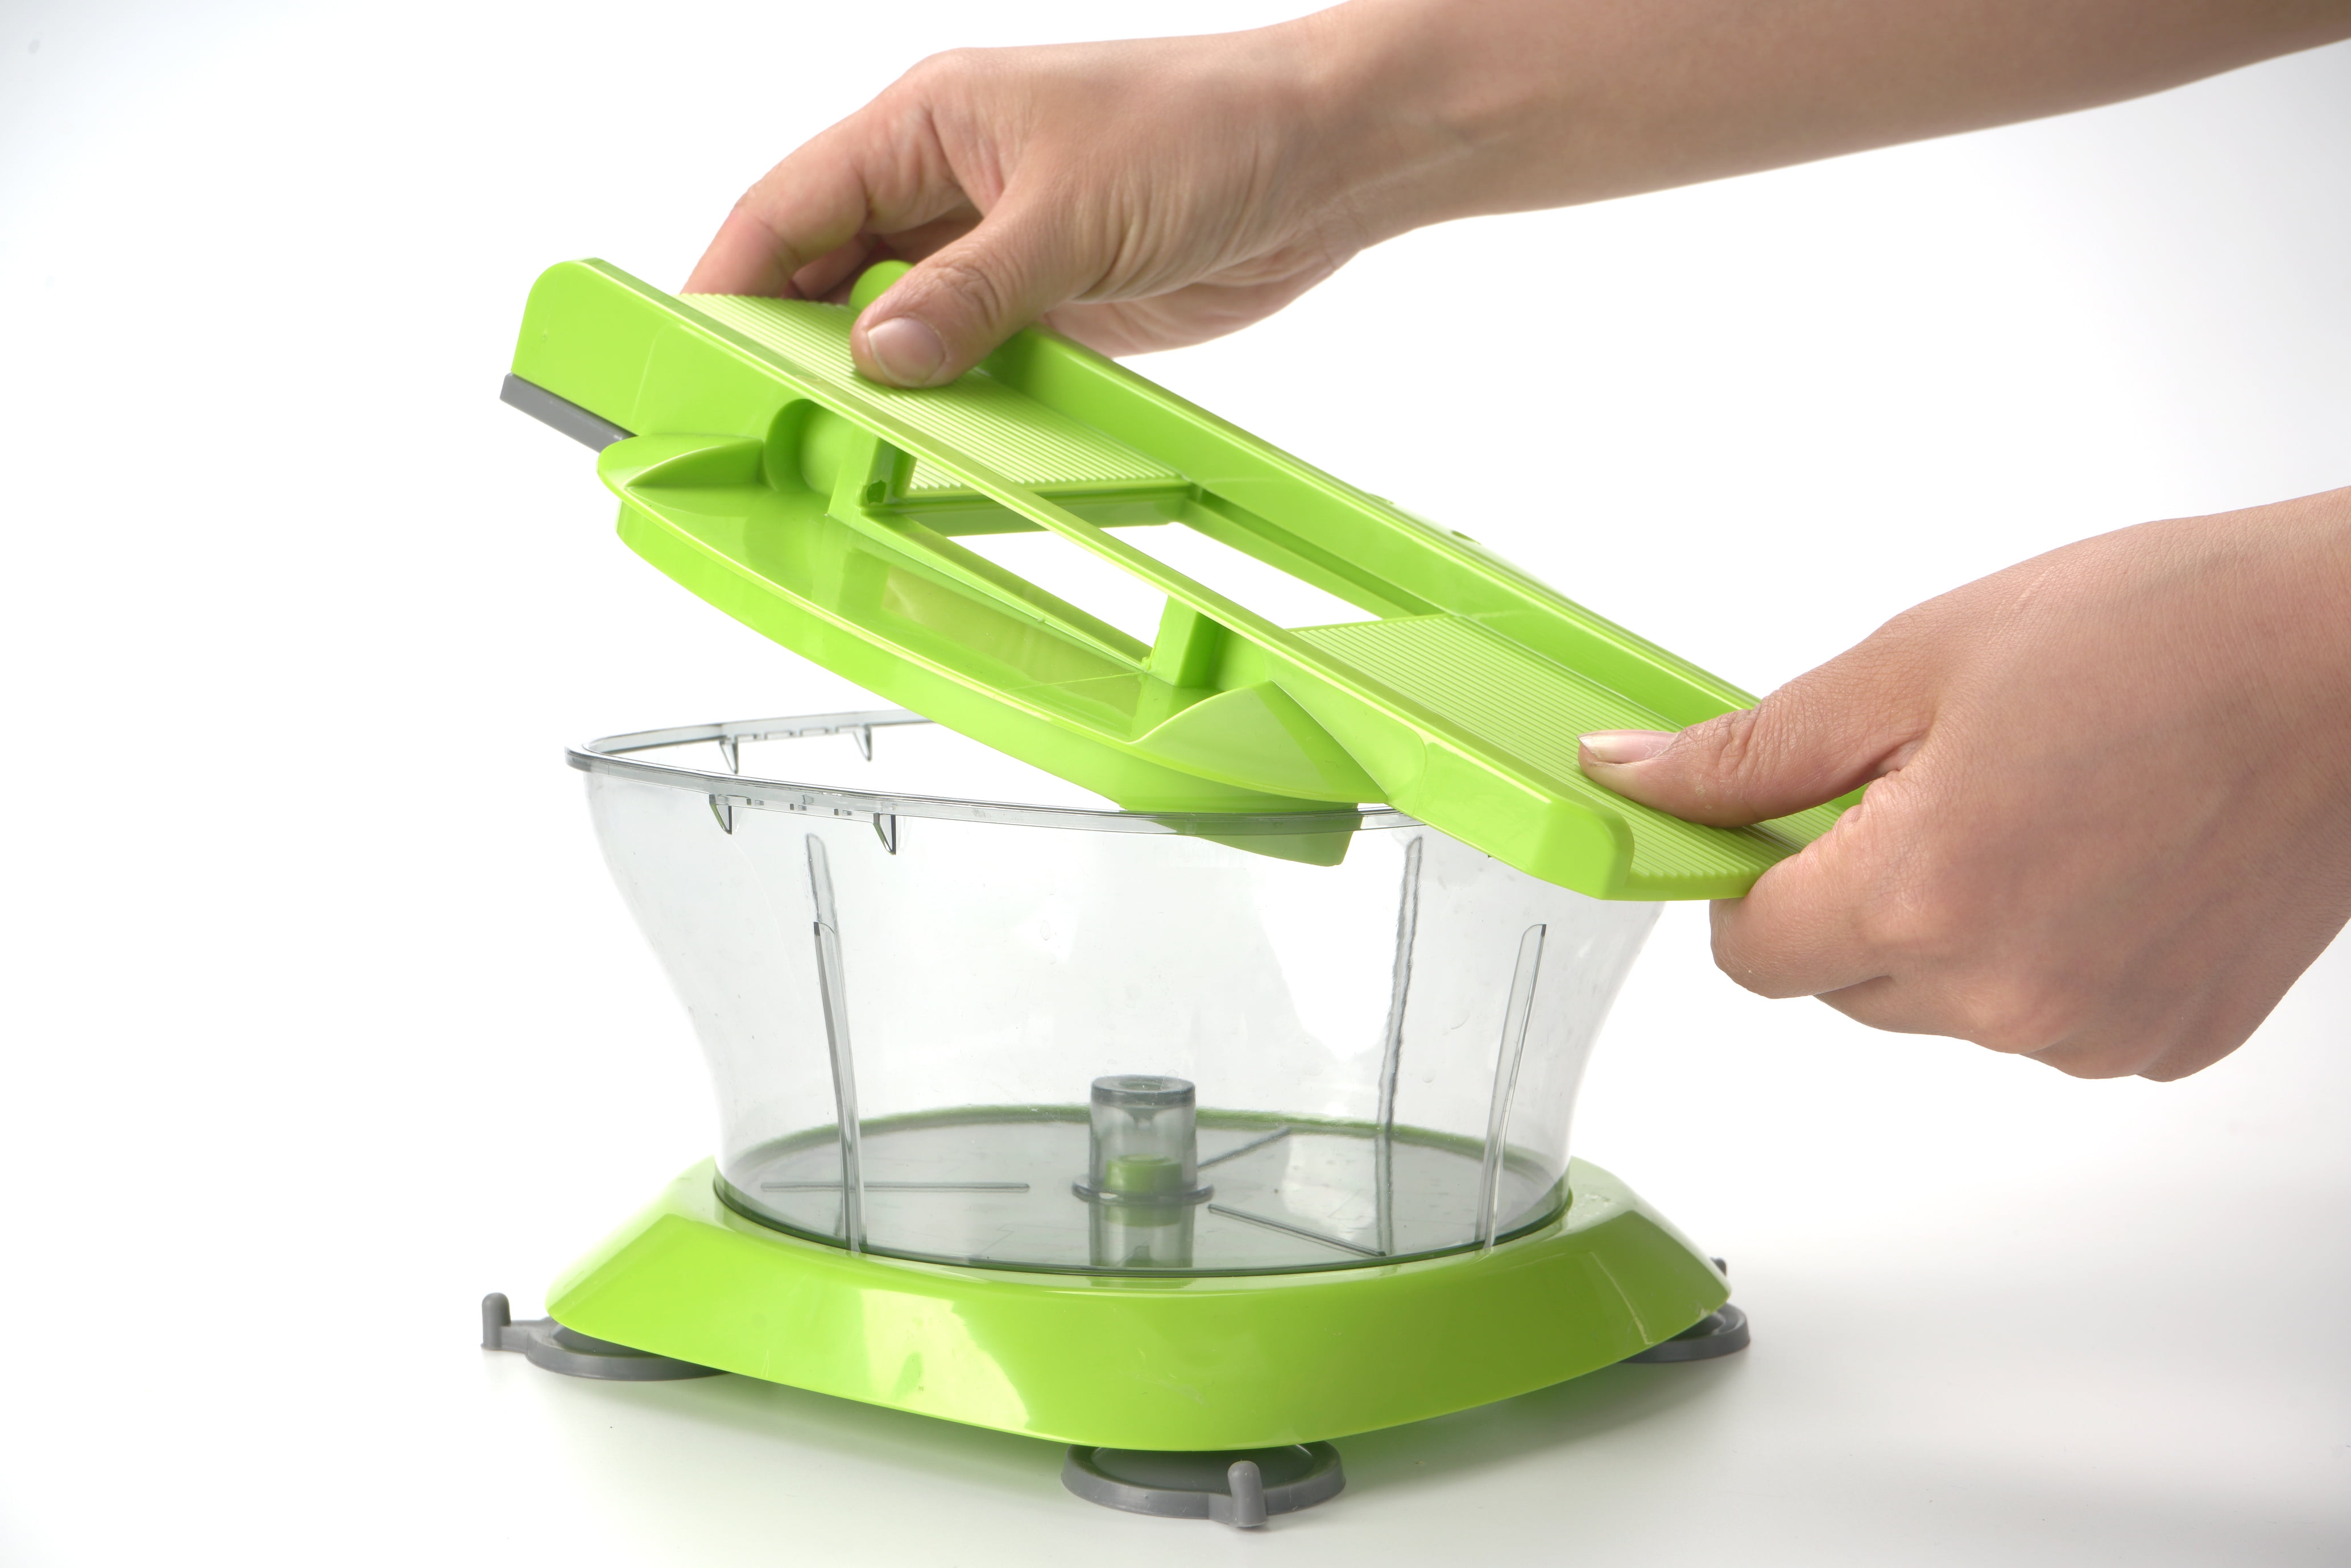 OXO Vegetable Chopper with Easy-Pour Opening - Macy's